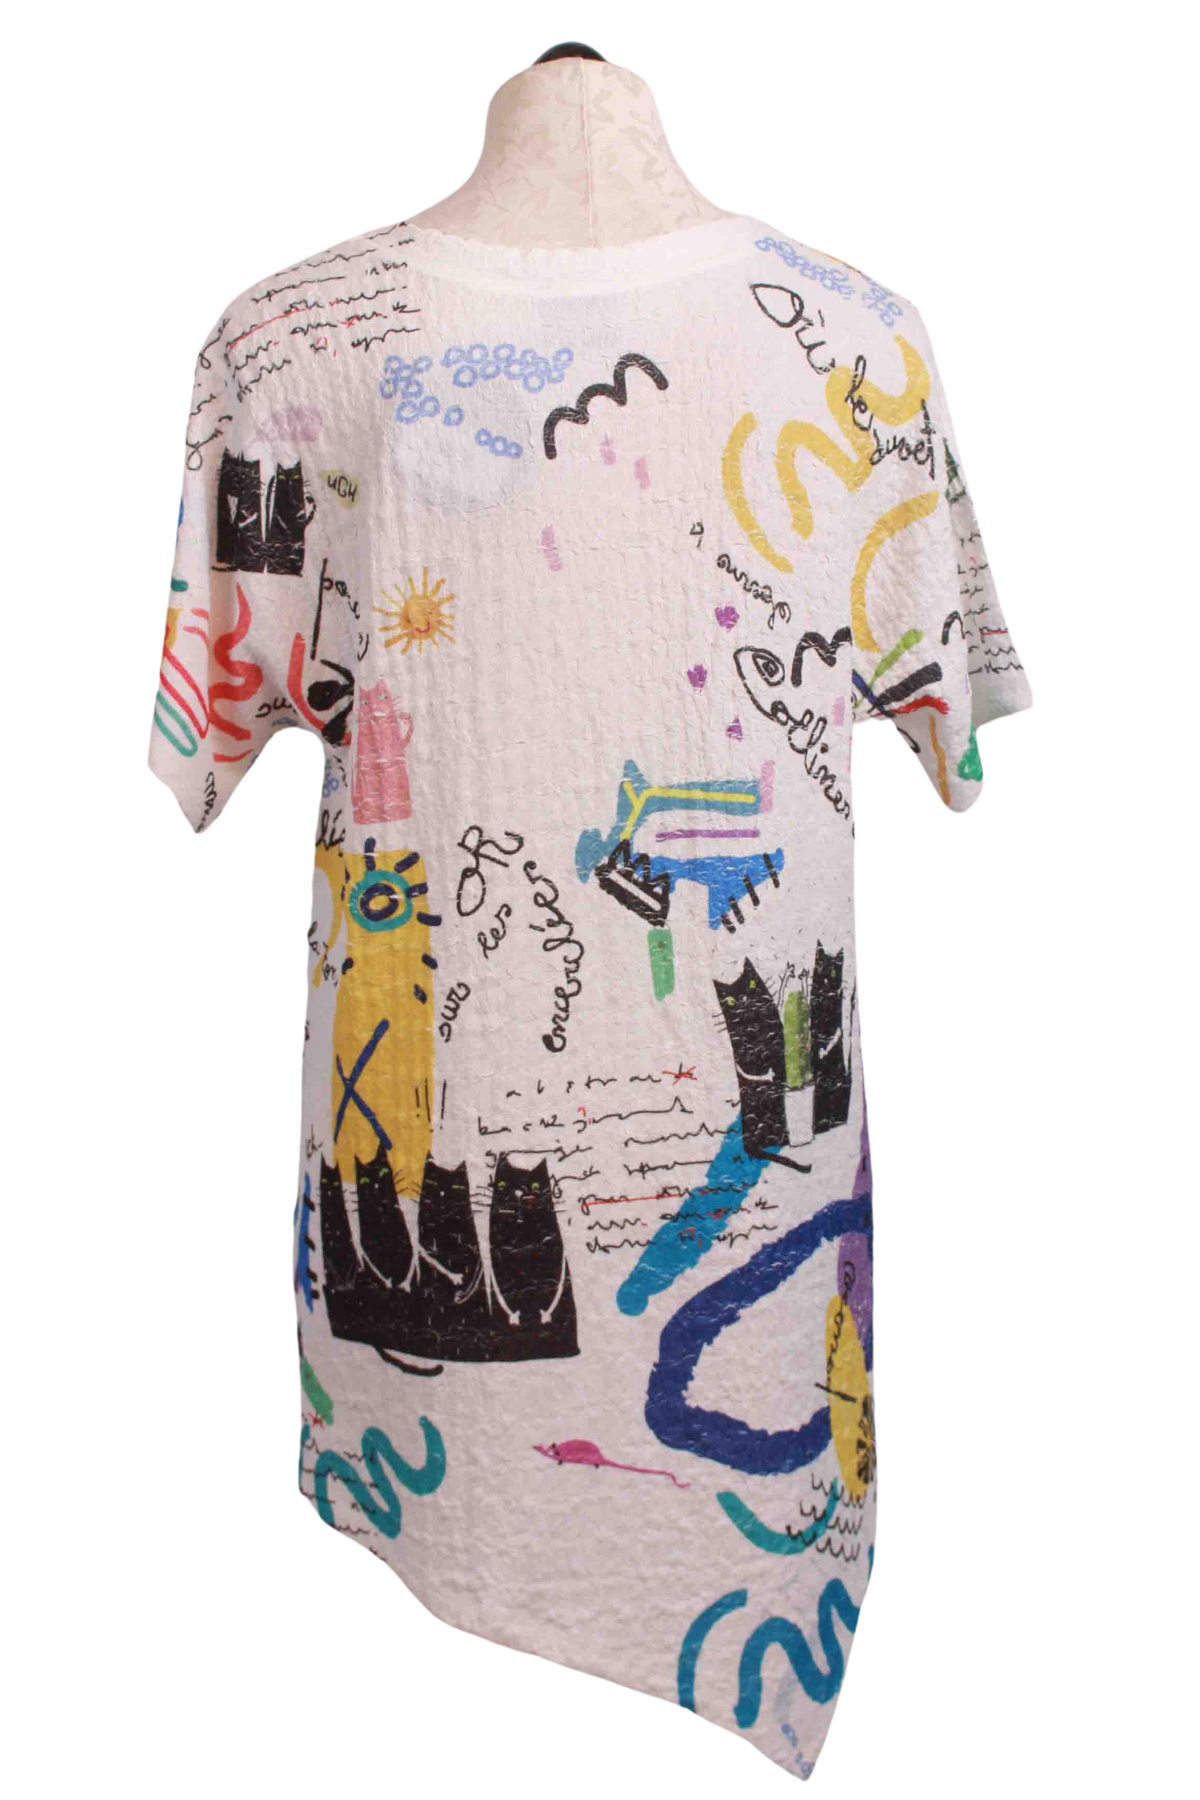 back view of White Short Sleeve Power Cats Print in a Waffle Fabric Tunic with Asymmetrical Hemline by Inoah